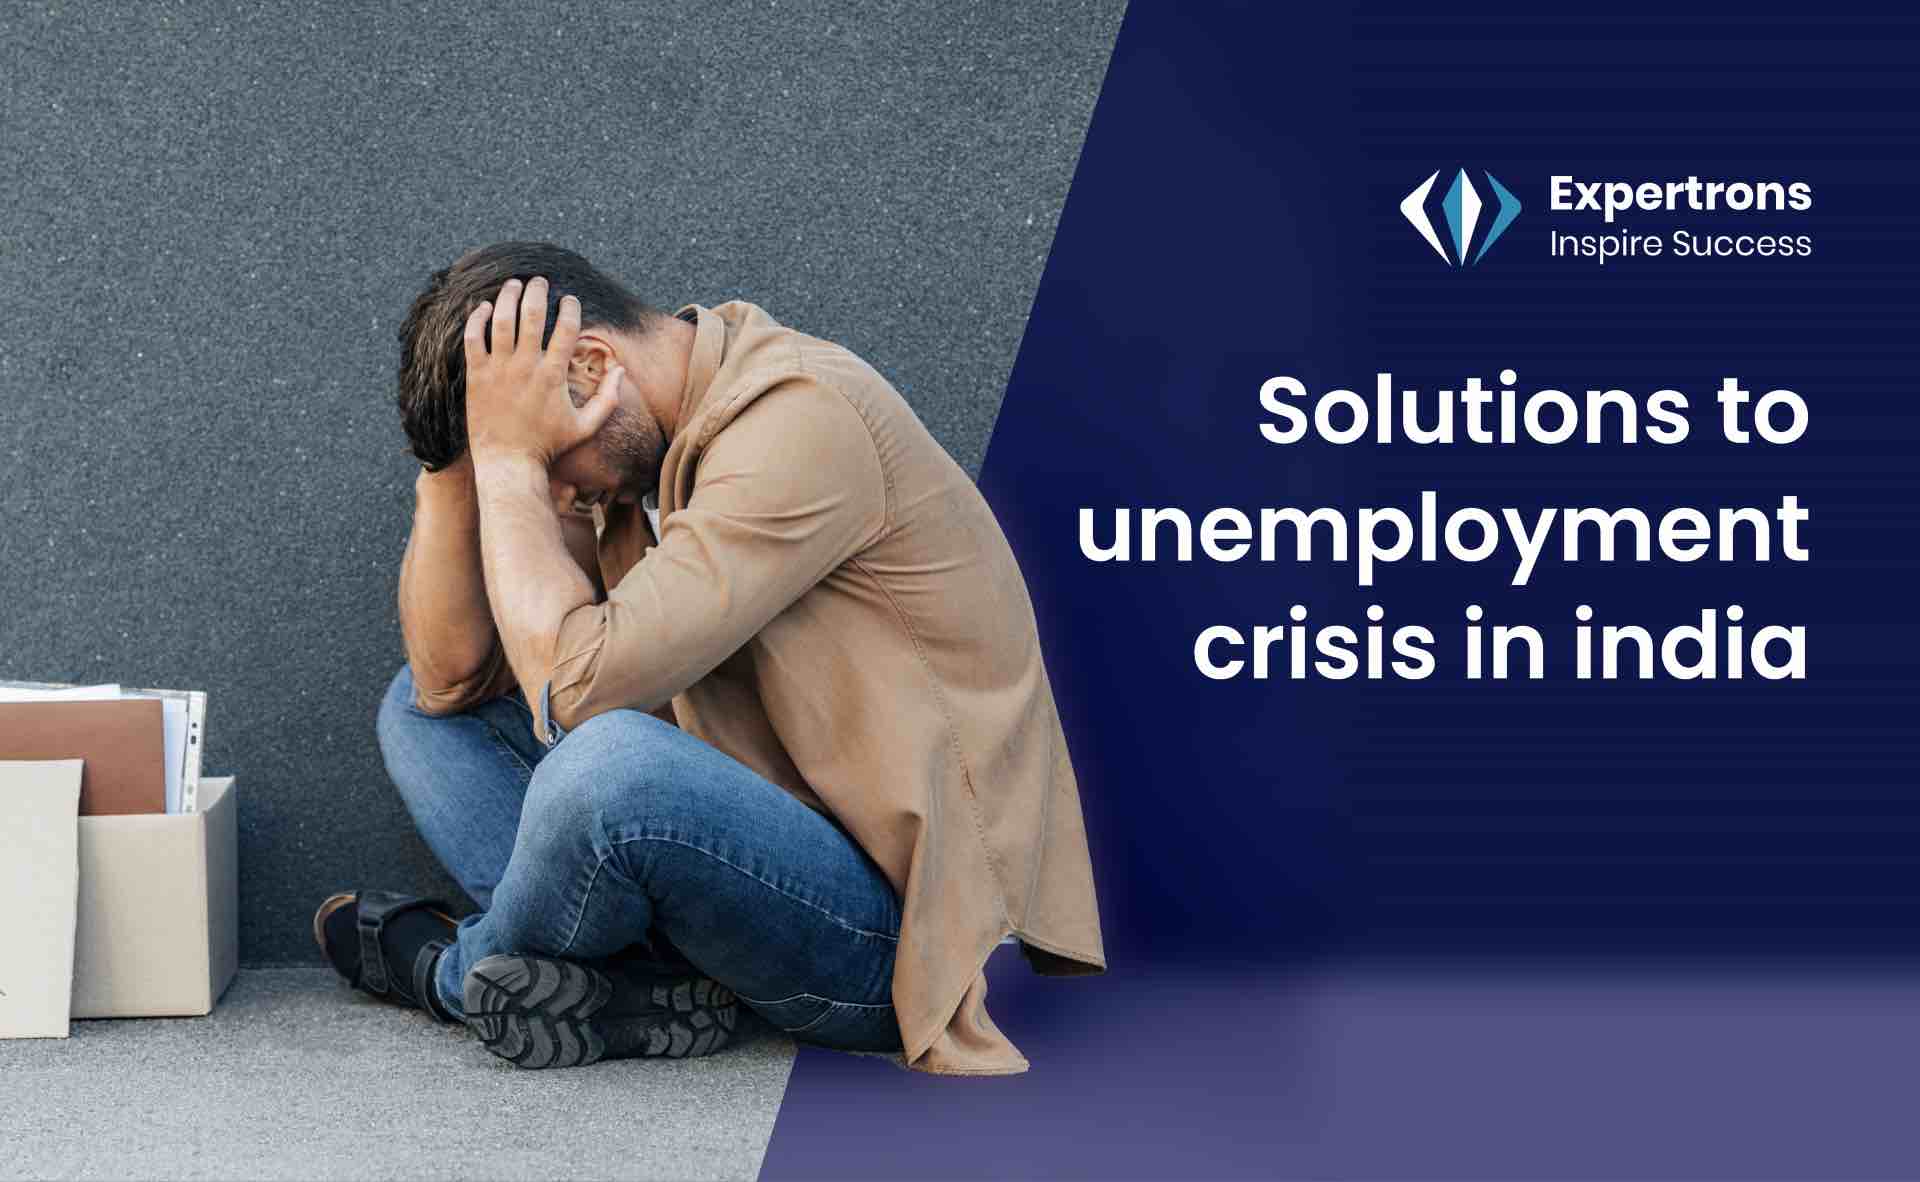 Unemployment crisis in India